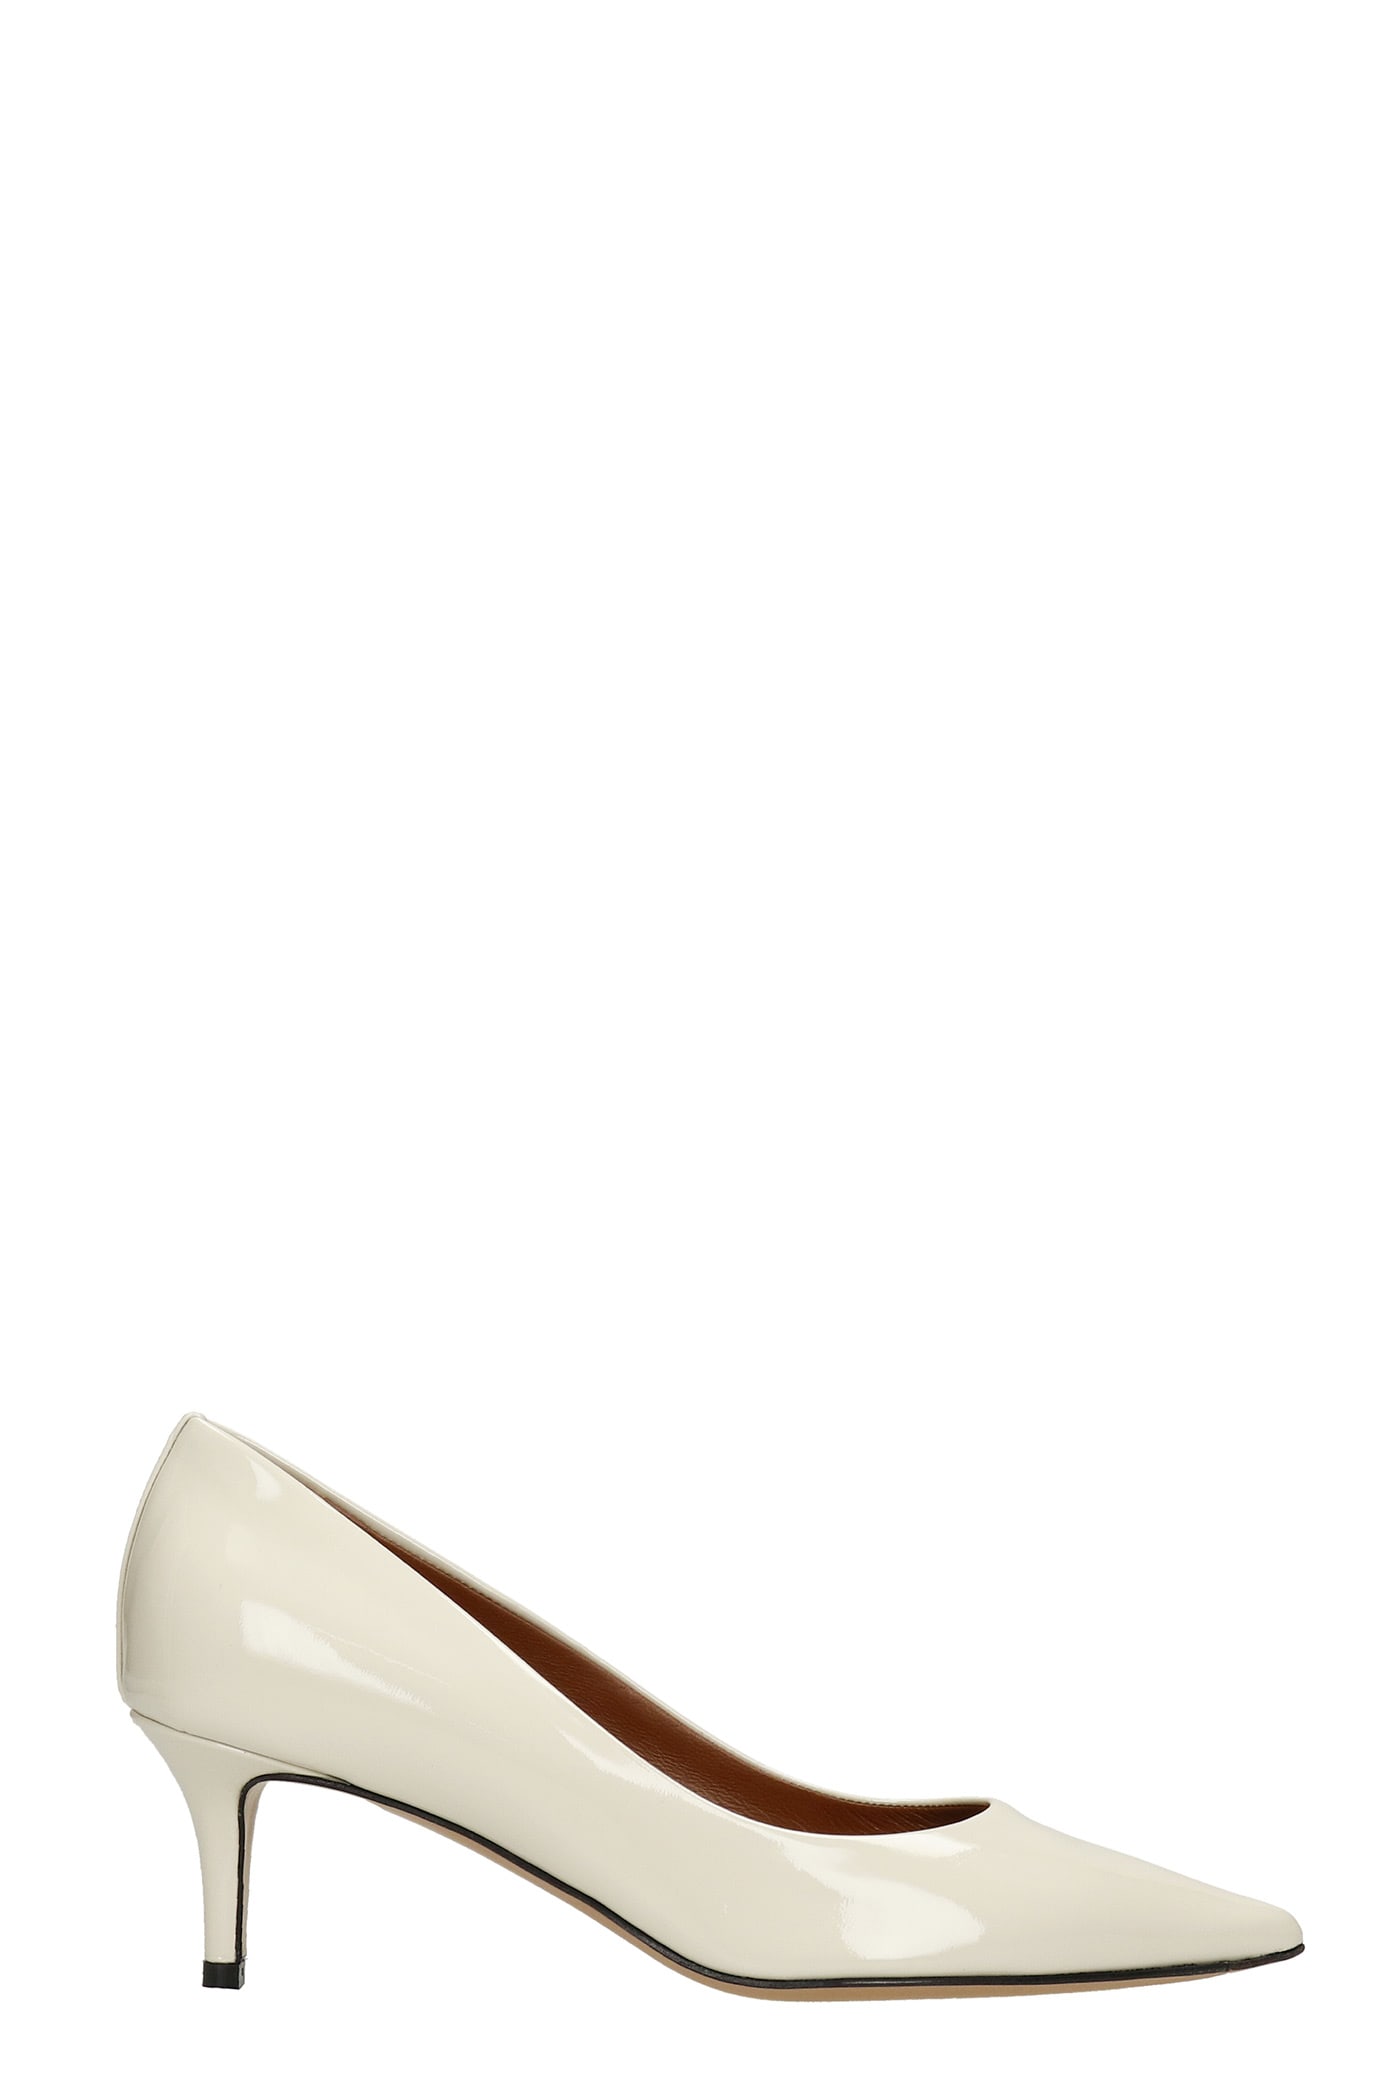 Marc Ellis Donna Pumps In White Patent Leather